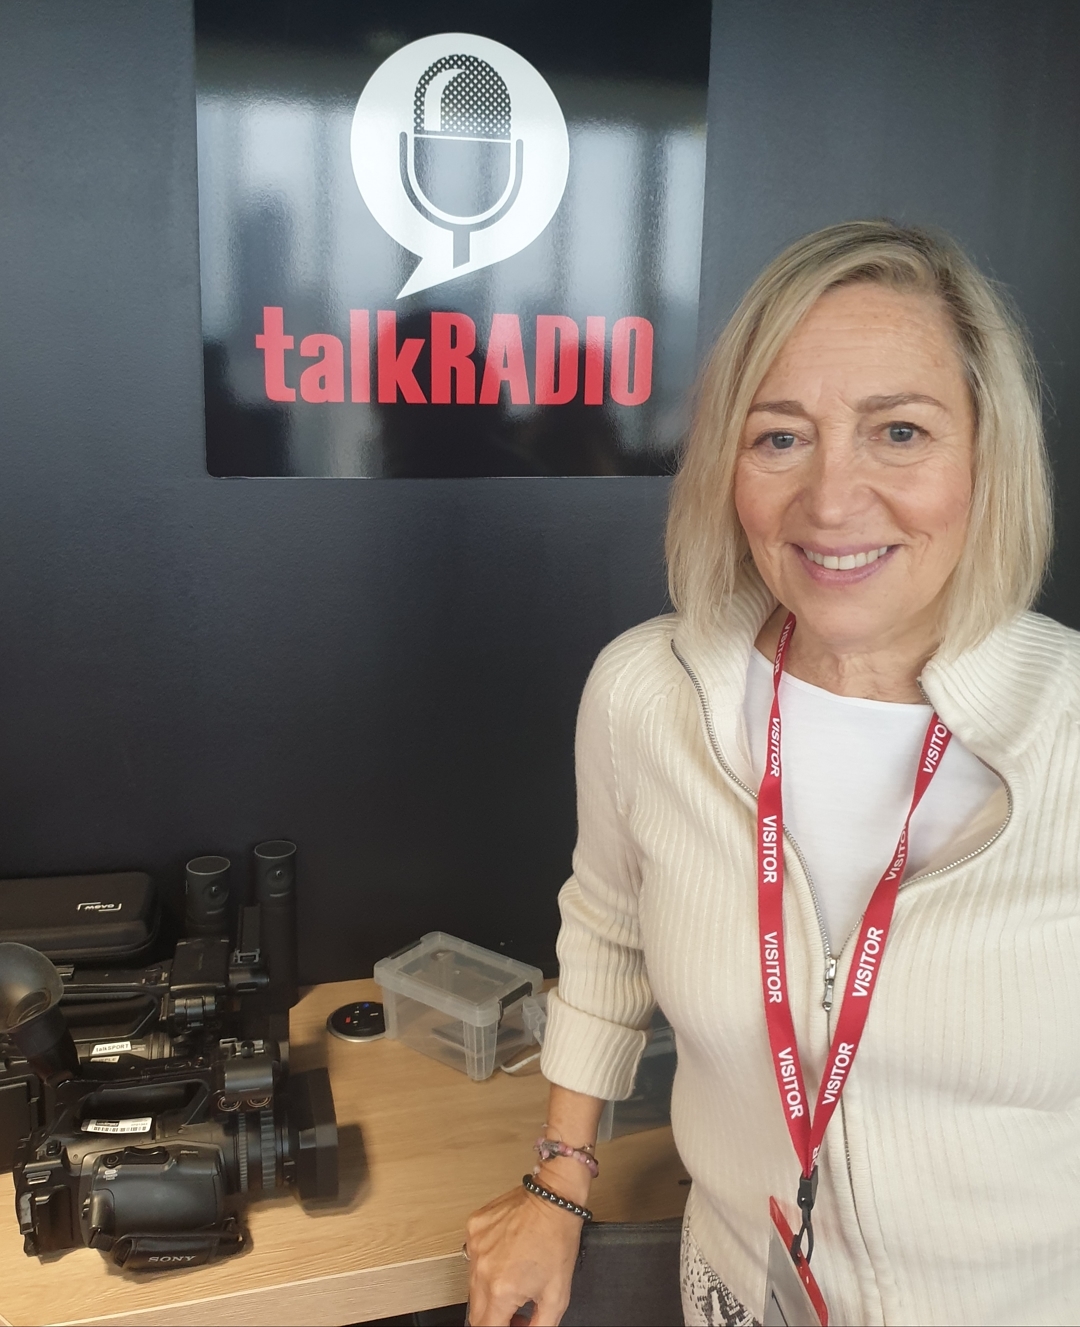 Forgot to post from 2 Saturdays ago.
Love doing radio and was with @stephanddom on @talkradiouk talking about all things to do with
Self-esteem, body-image, confidence, self-confidence, positivity, social media, mental health, whats real and whats not, filters, teens and online bullying , anxiety and more.
You can still listen to the programme on my blog
Www.styleyourlifeblog.co.uk
And
- a shout out to Steph @stephanddom hope all well with you 
.
.
.
.
.
.